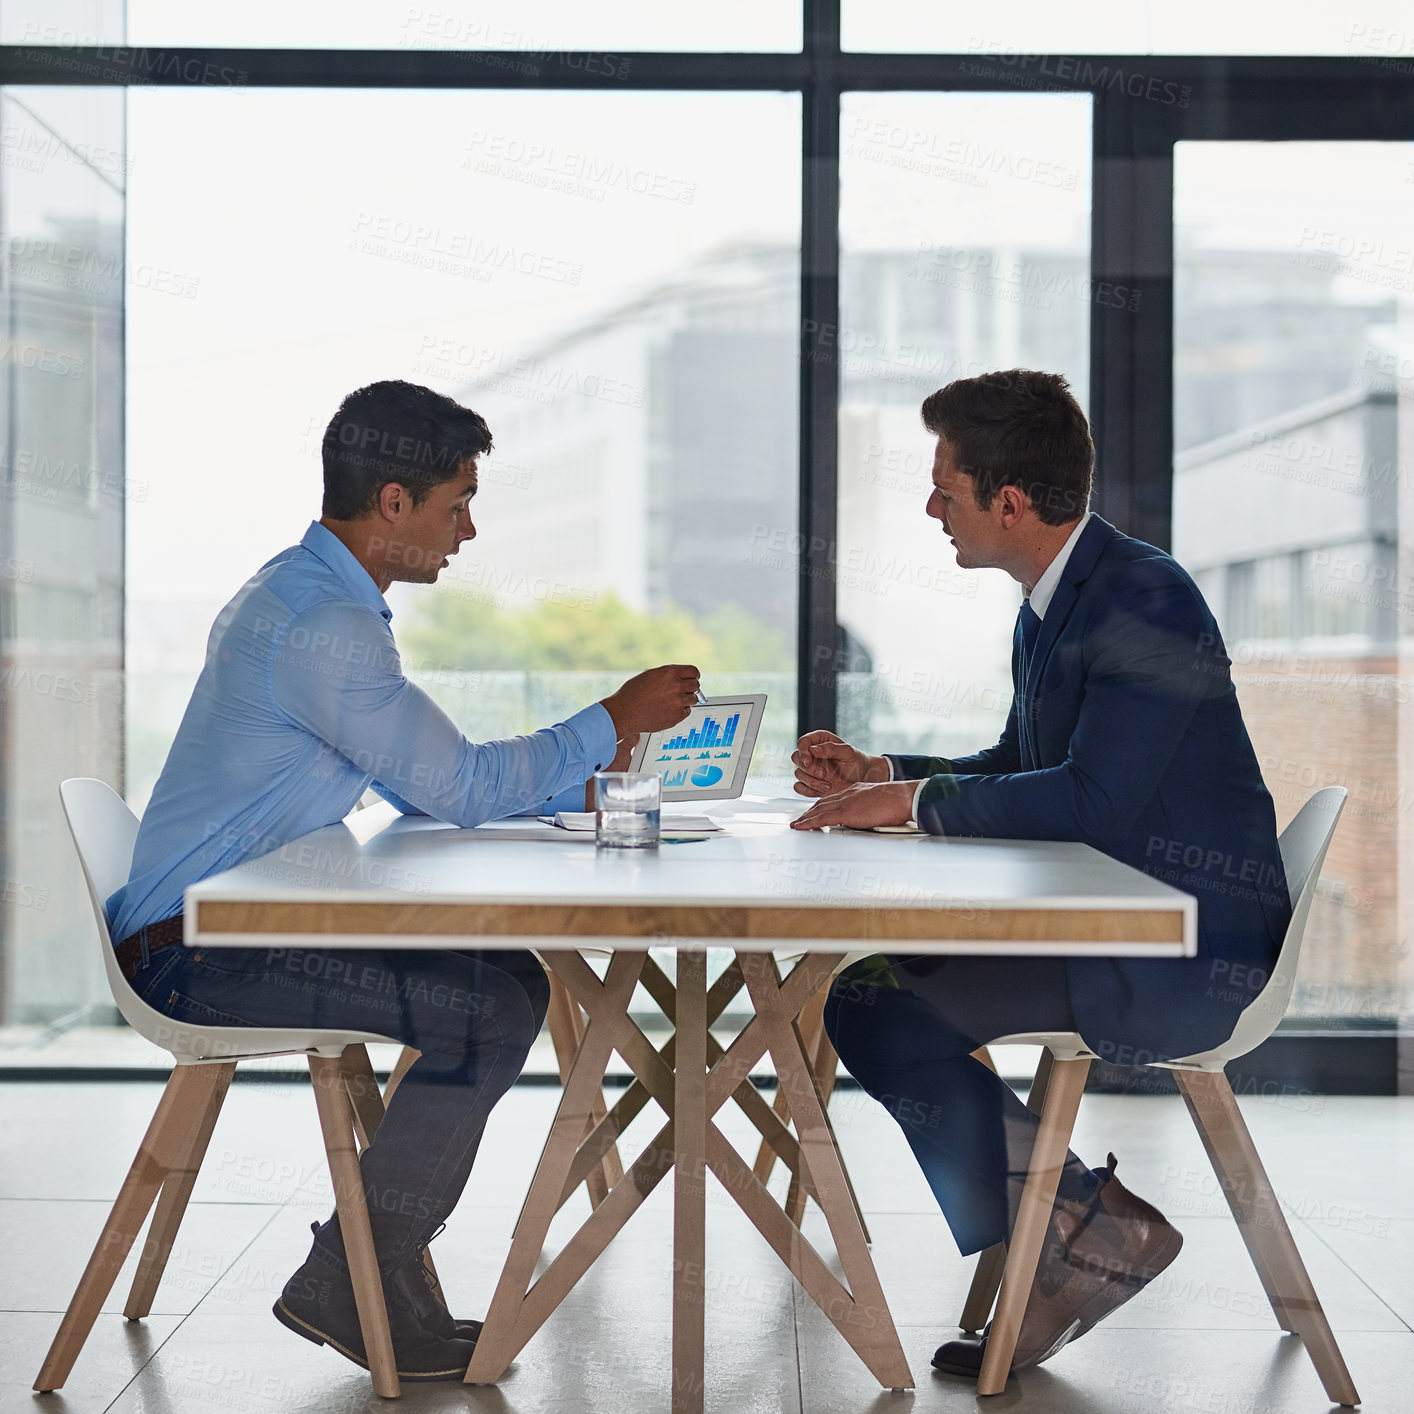 Buy stock photo Shot of two businessmen using a digital tablet during a meeting in an office